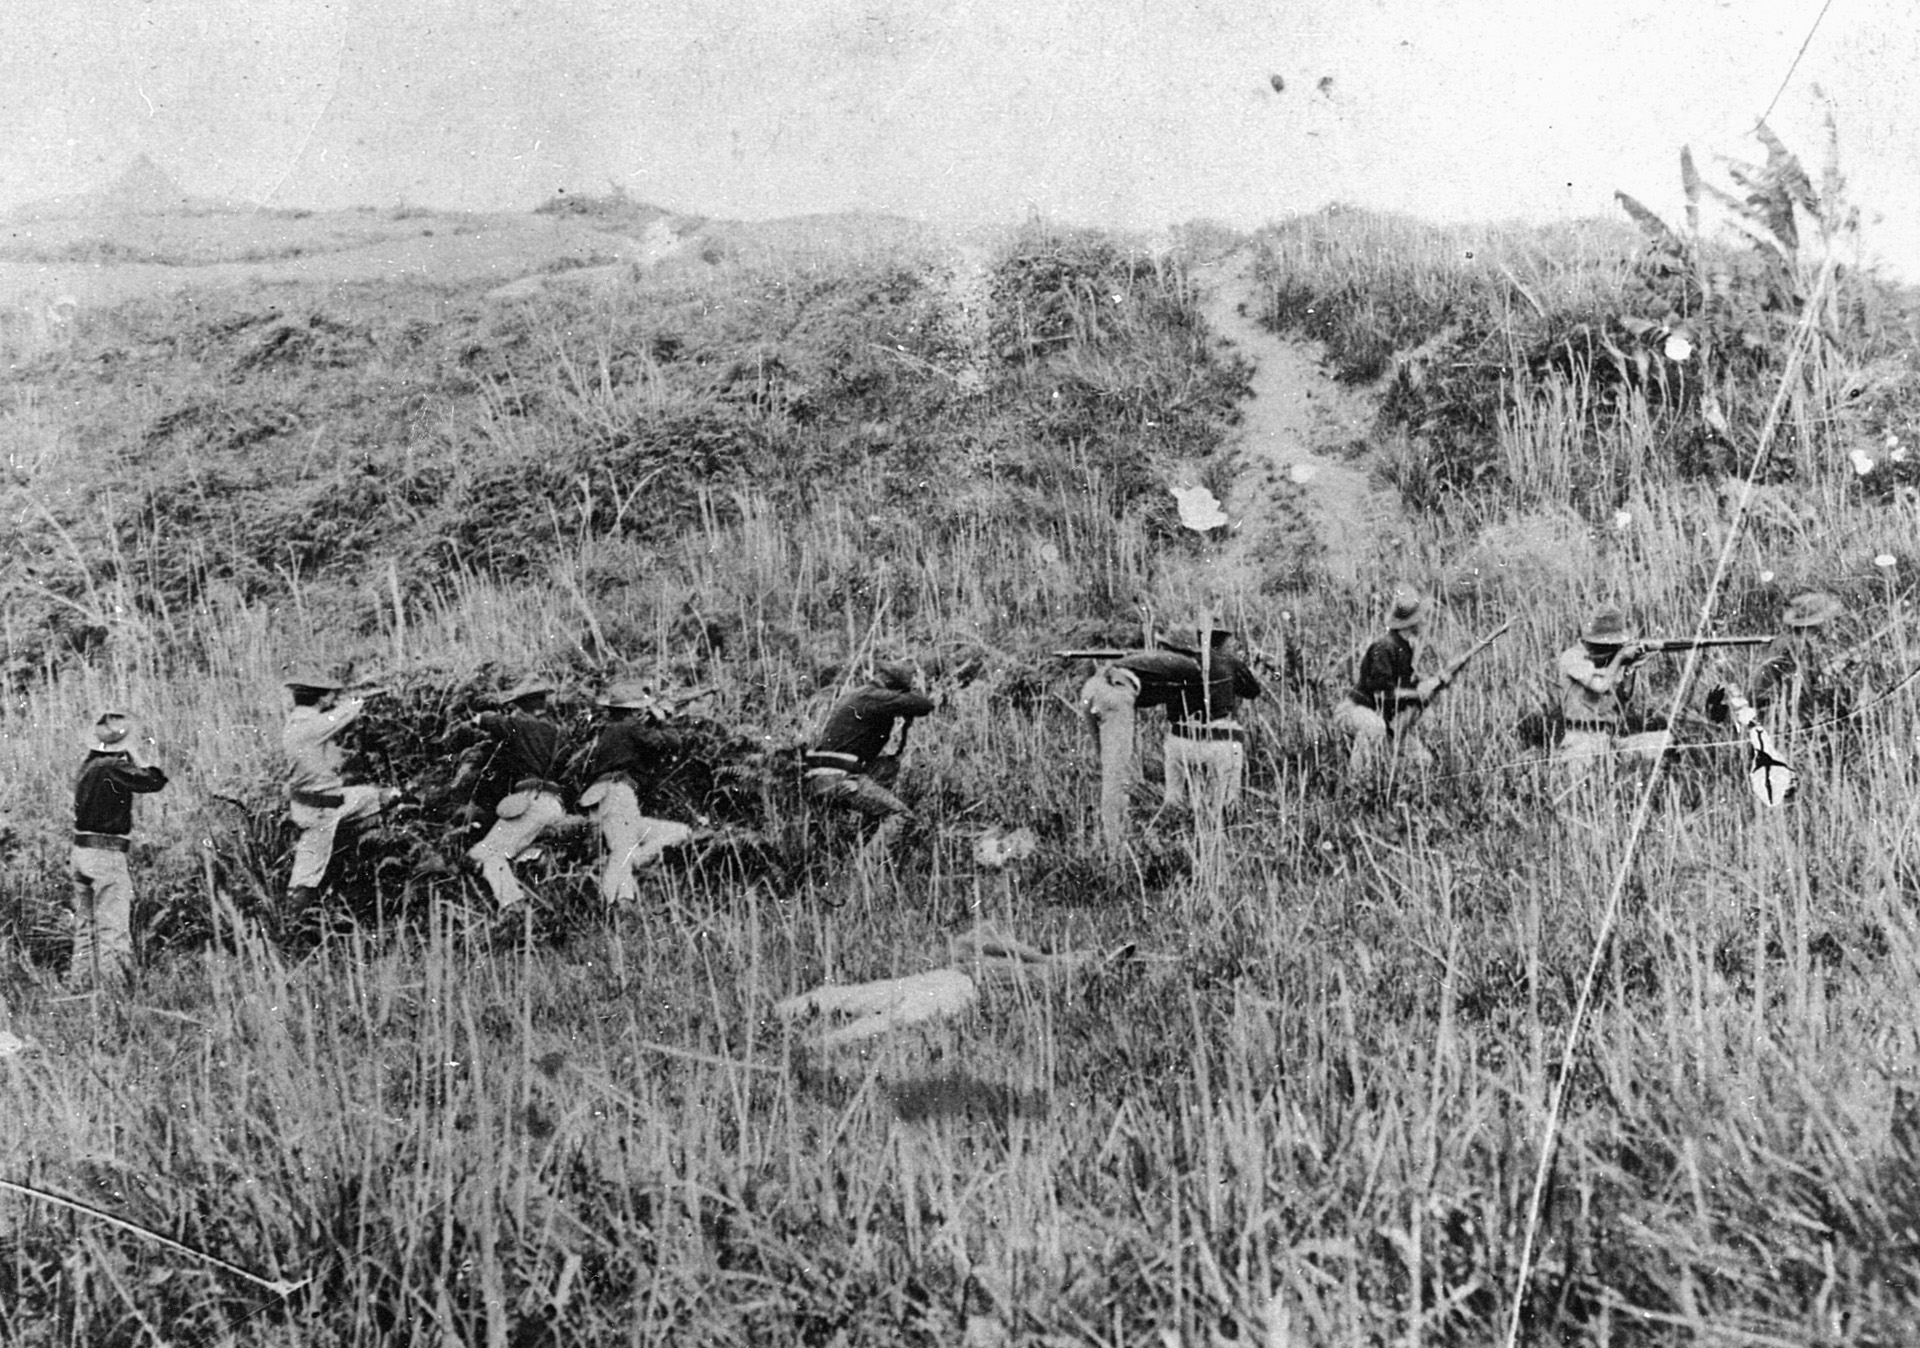 U.S. Marines take on insurgents in the Philippine Islands during 1901.